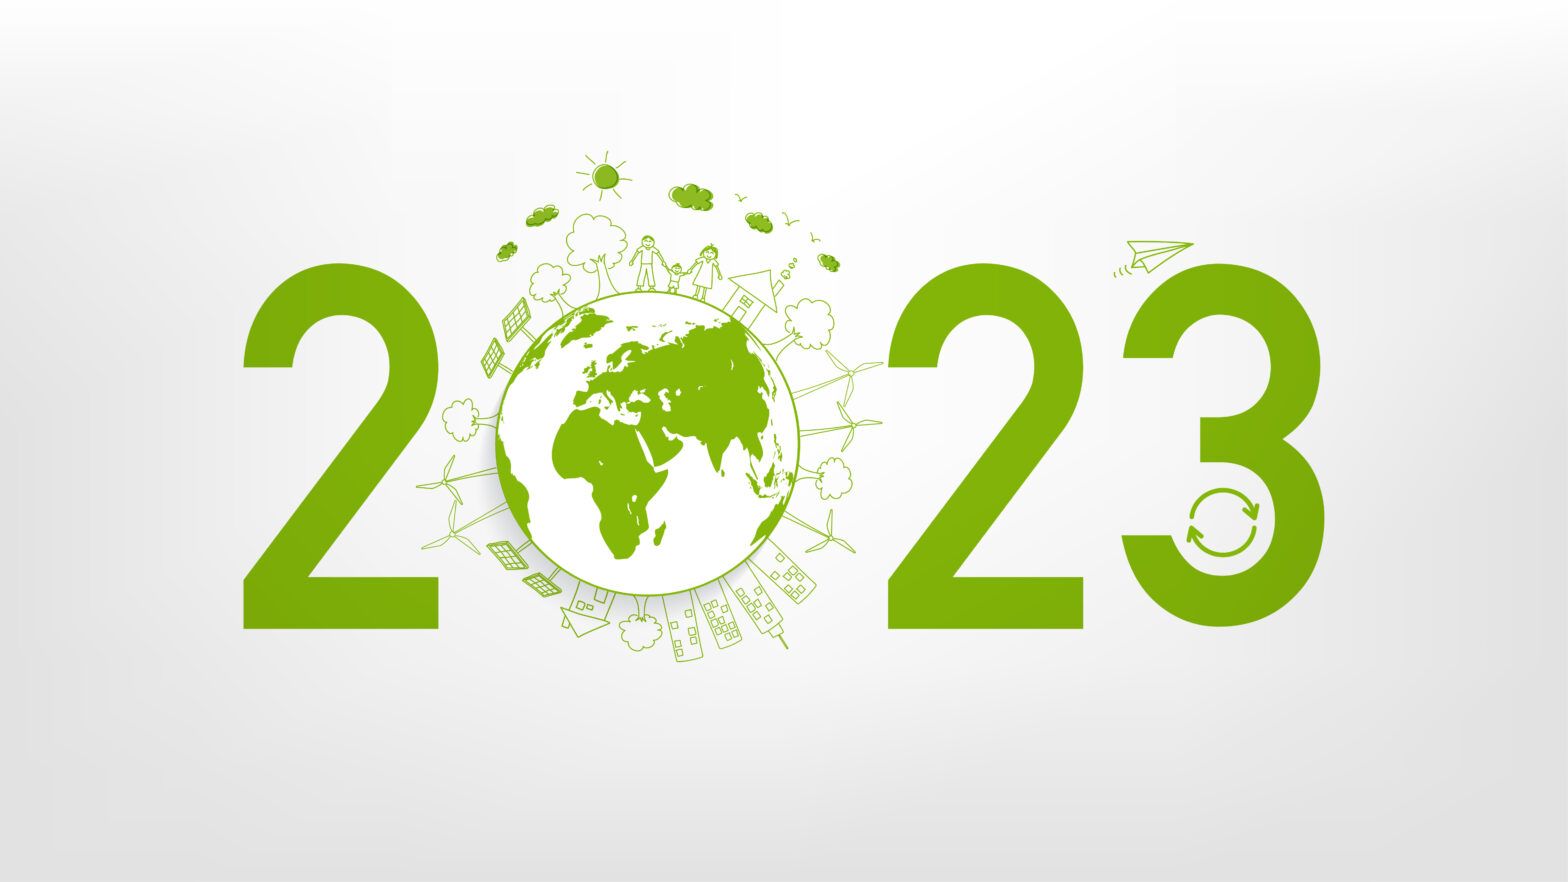 The US ESG themes to watch in 2023